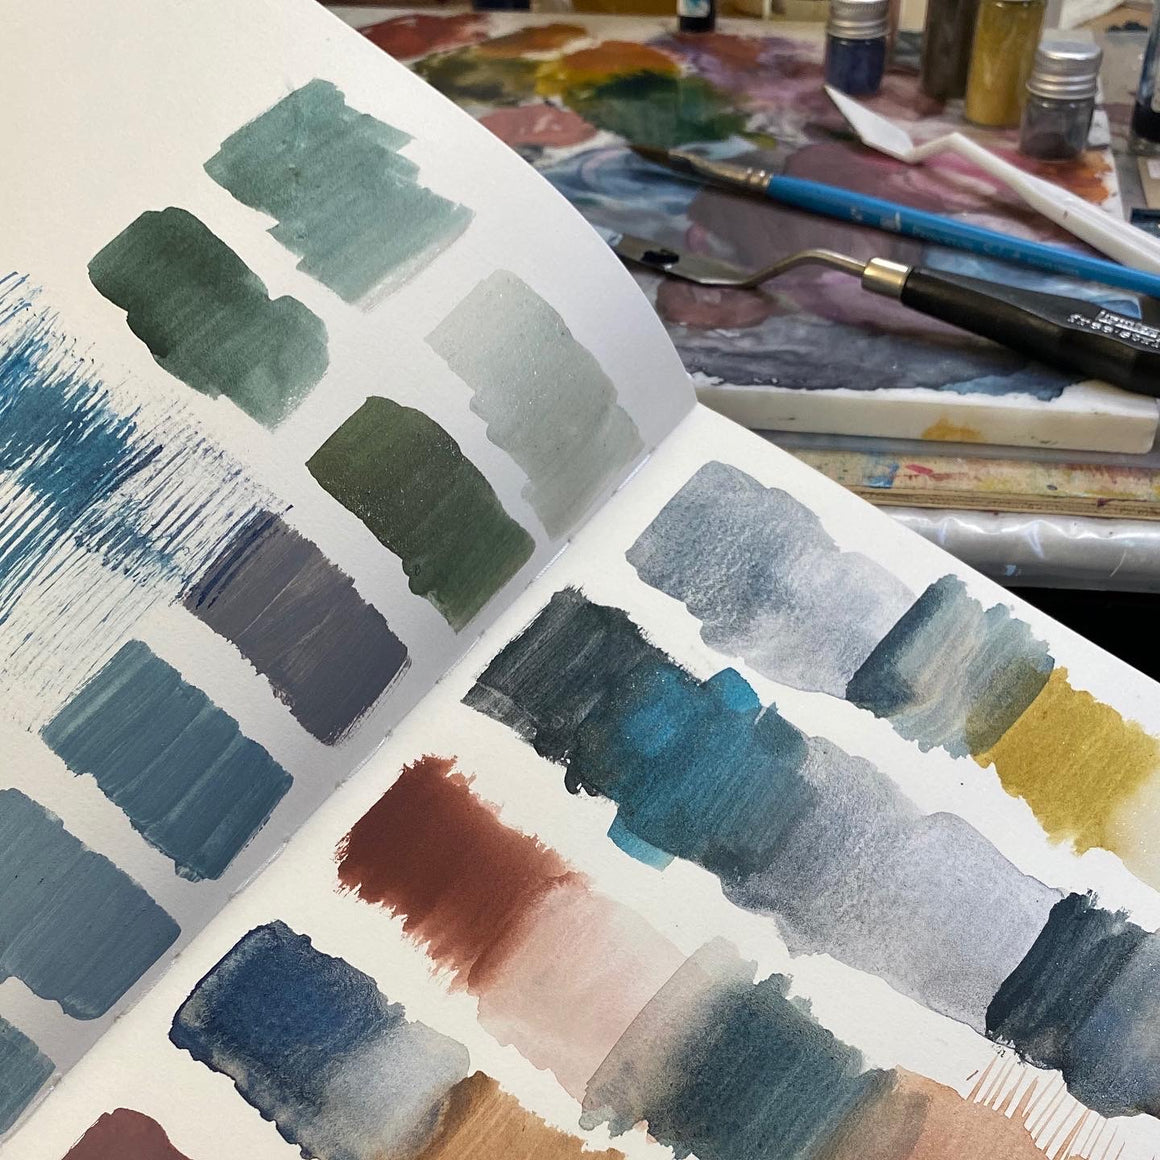 SHADES of LOVE hand-mixed #tracibautistaCOLOR pigment kit + paint making workshop